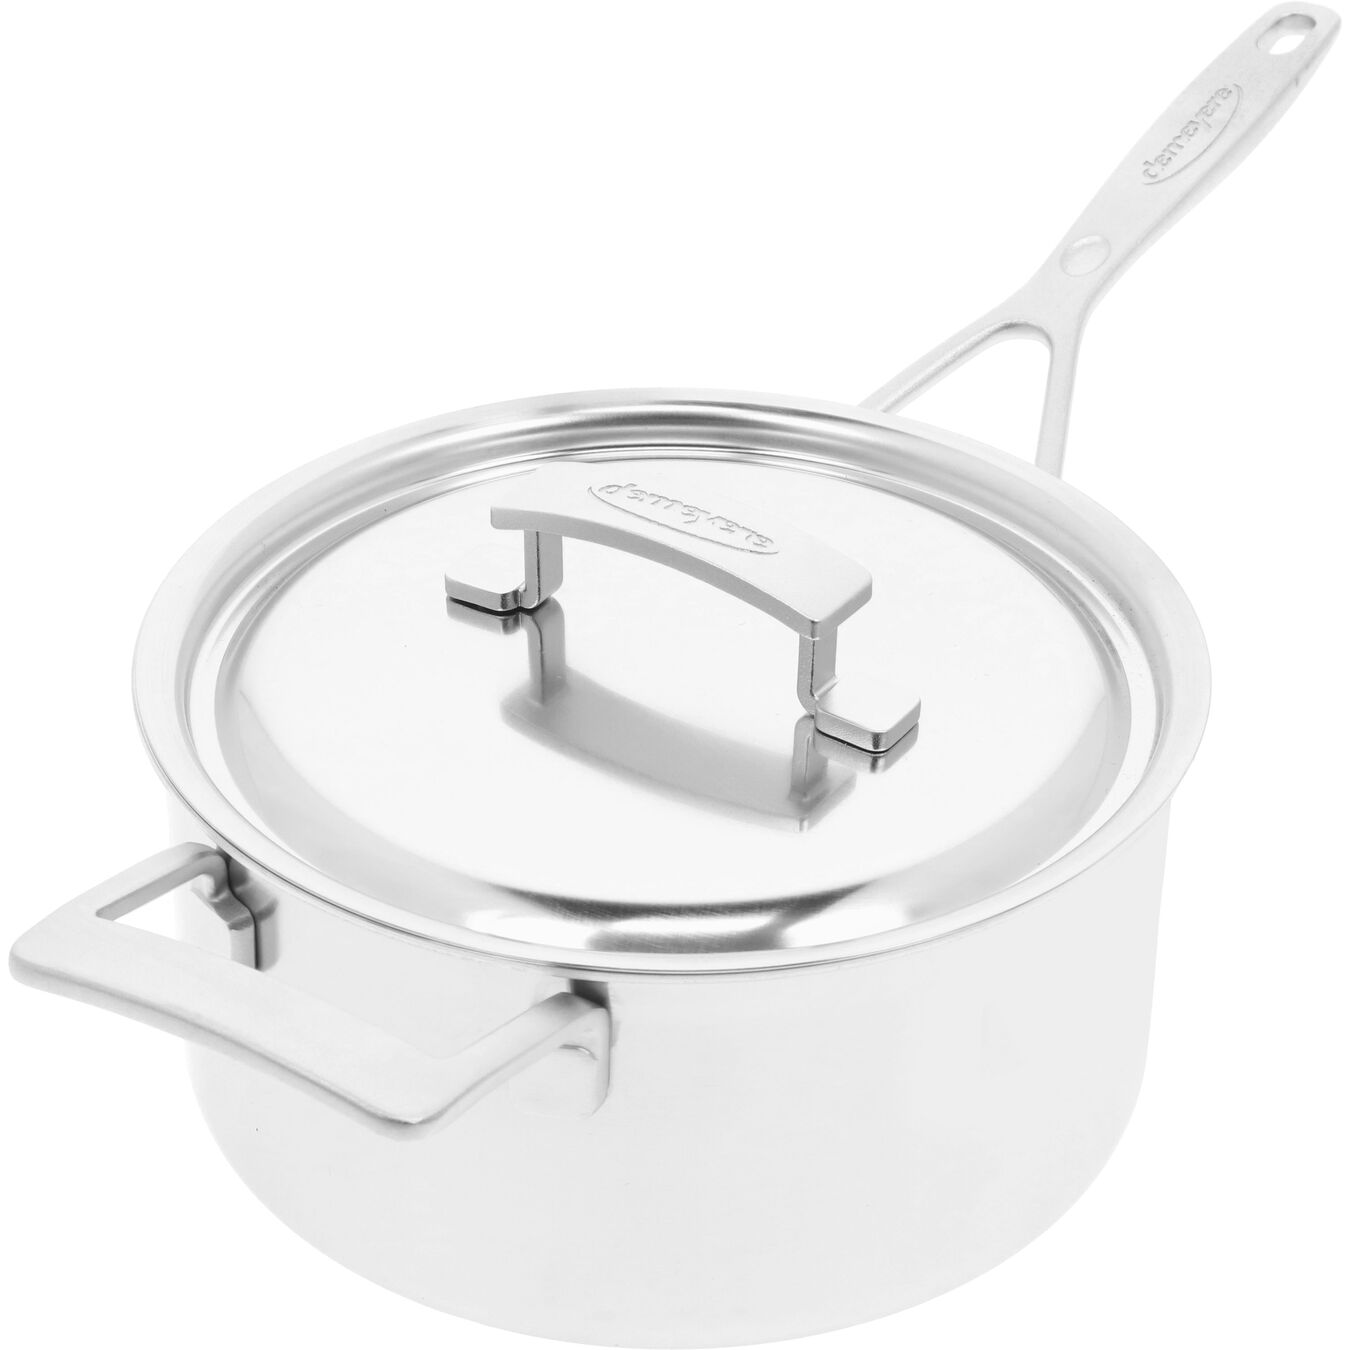 4 l 18/10 Stainless Steel round Sauce pan with lid, silver,,large 4